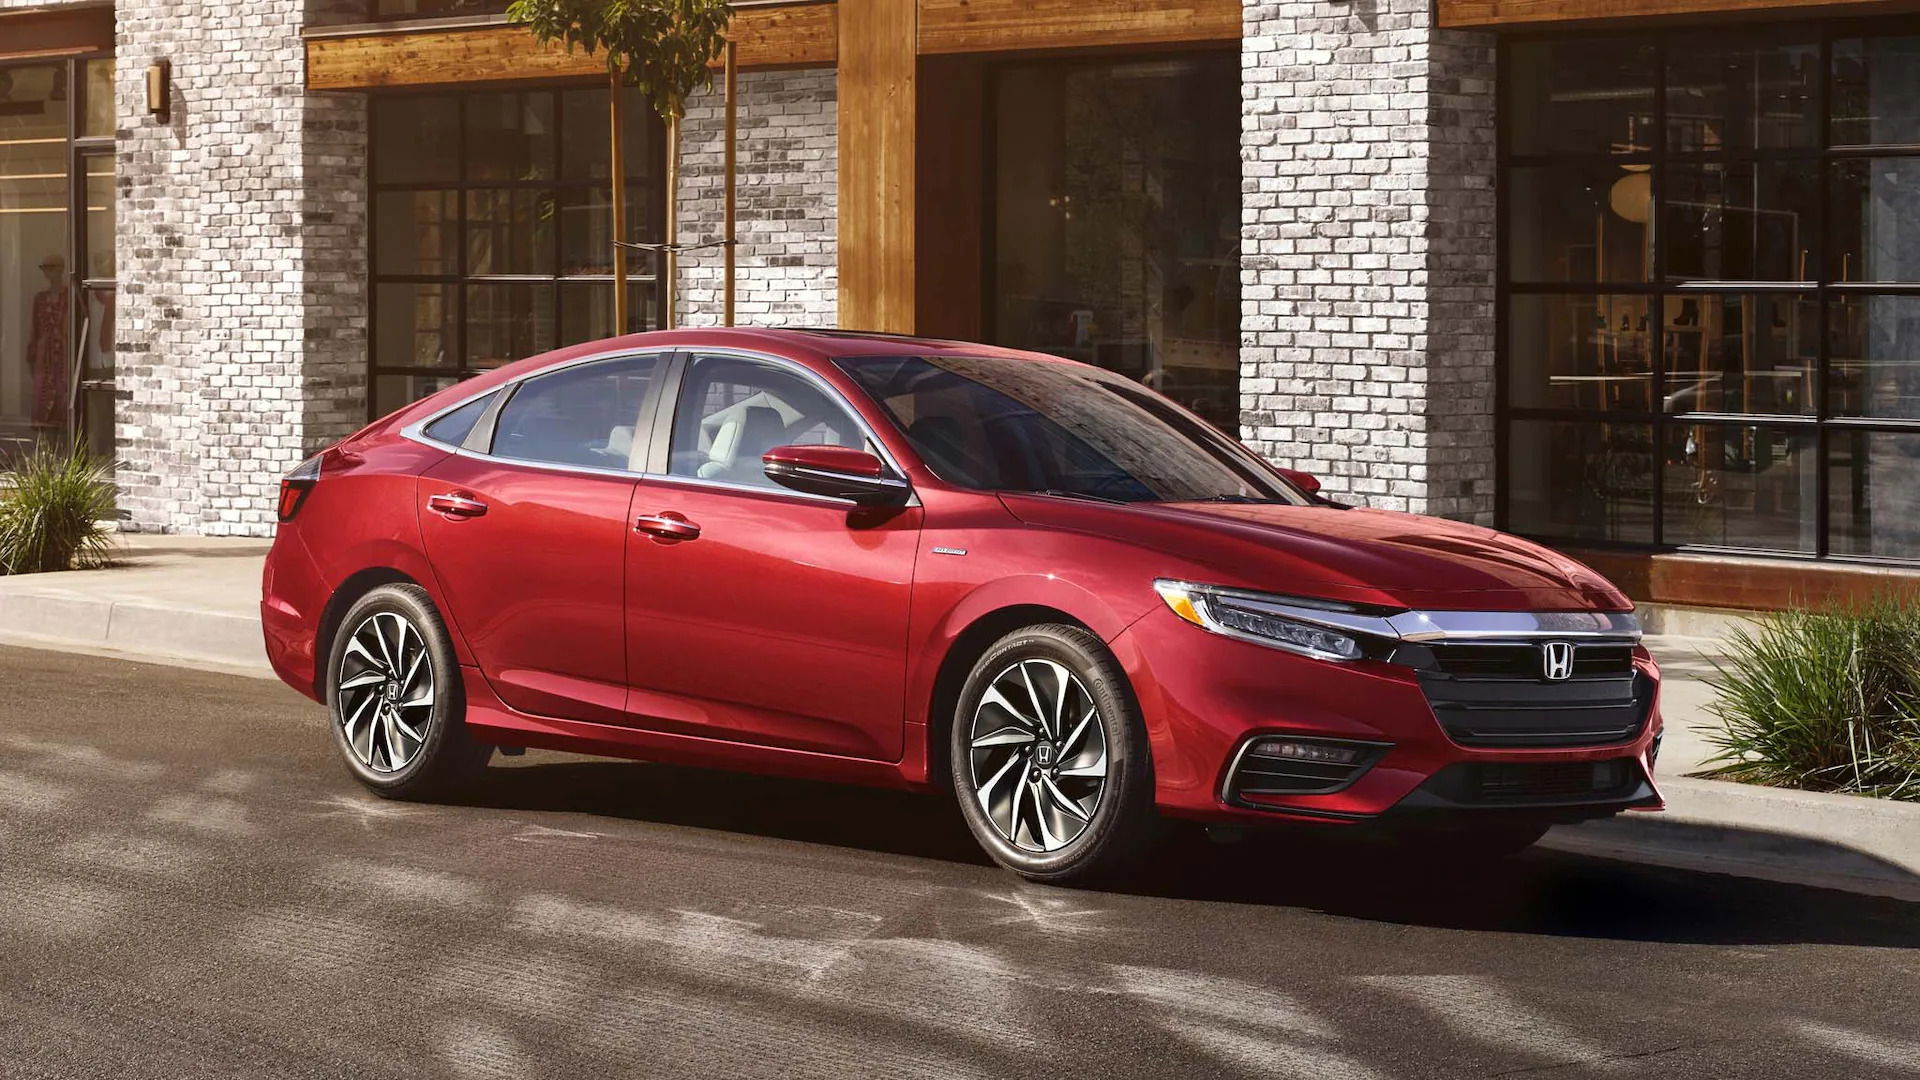 The ten most fuel-efficient used cars in 2023 - 2021 Honda Insight.